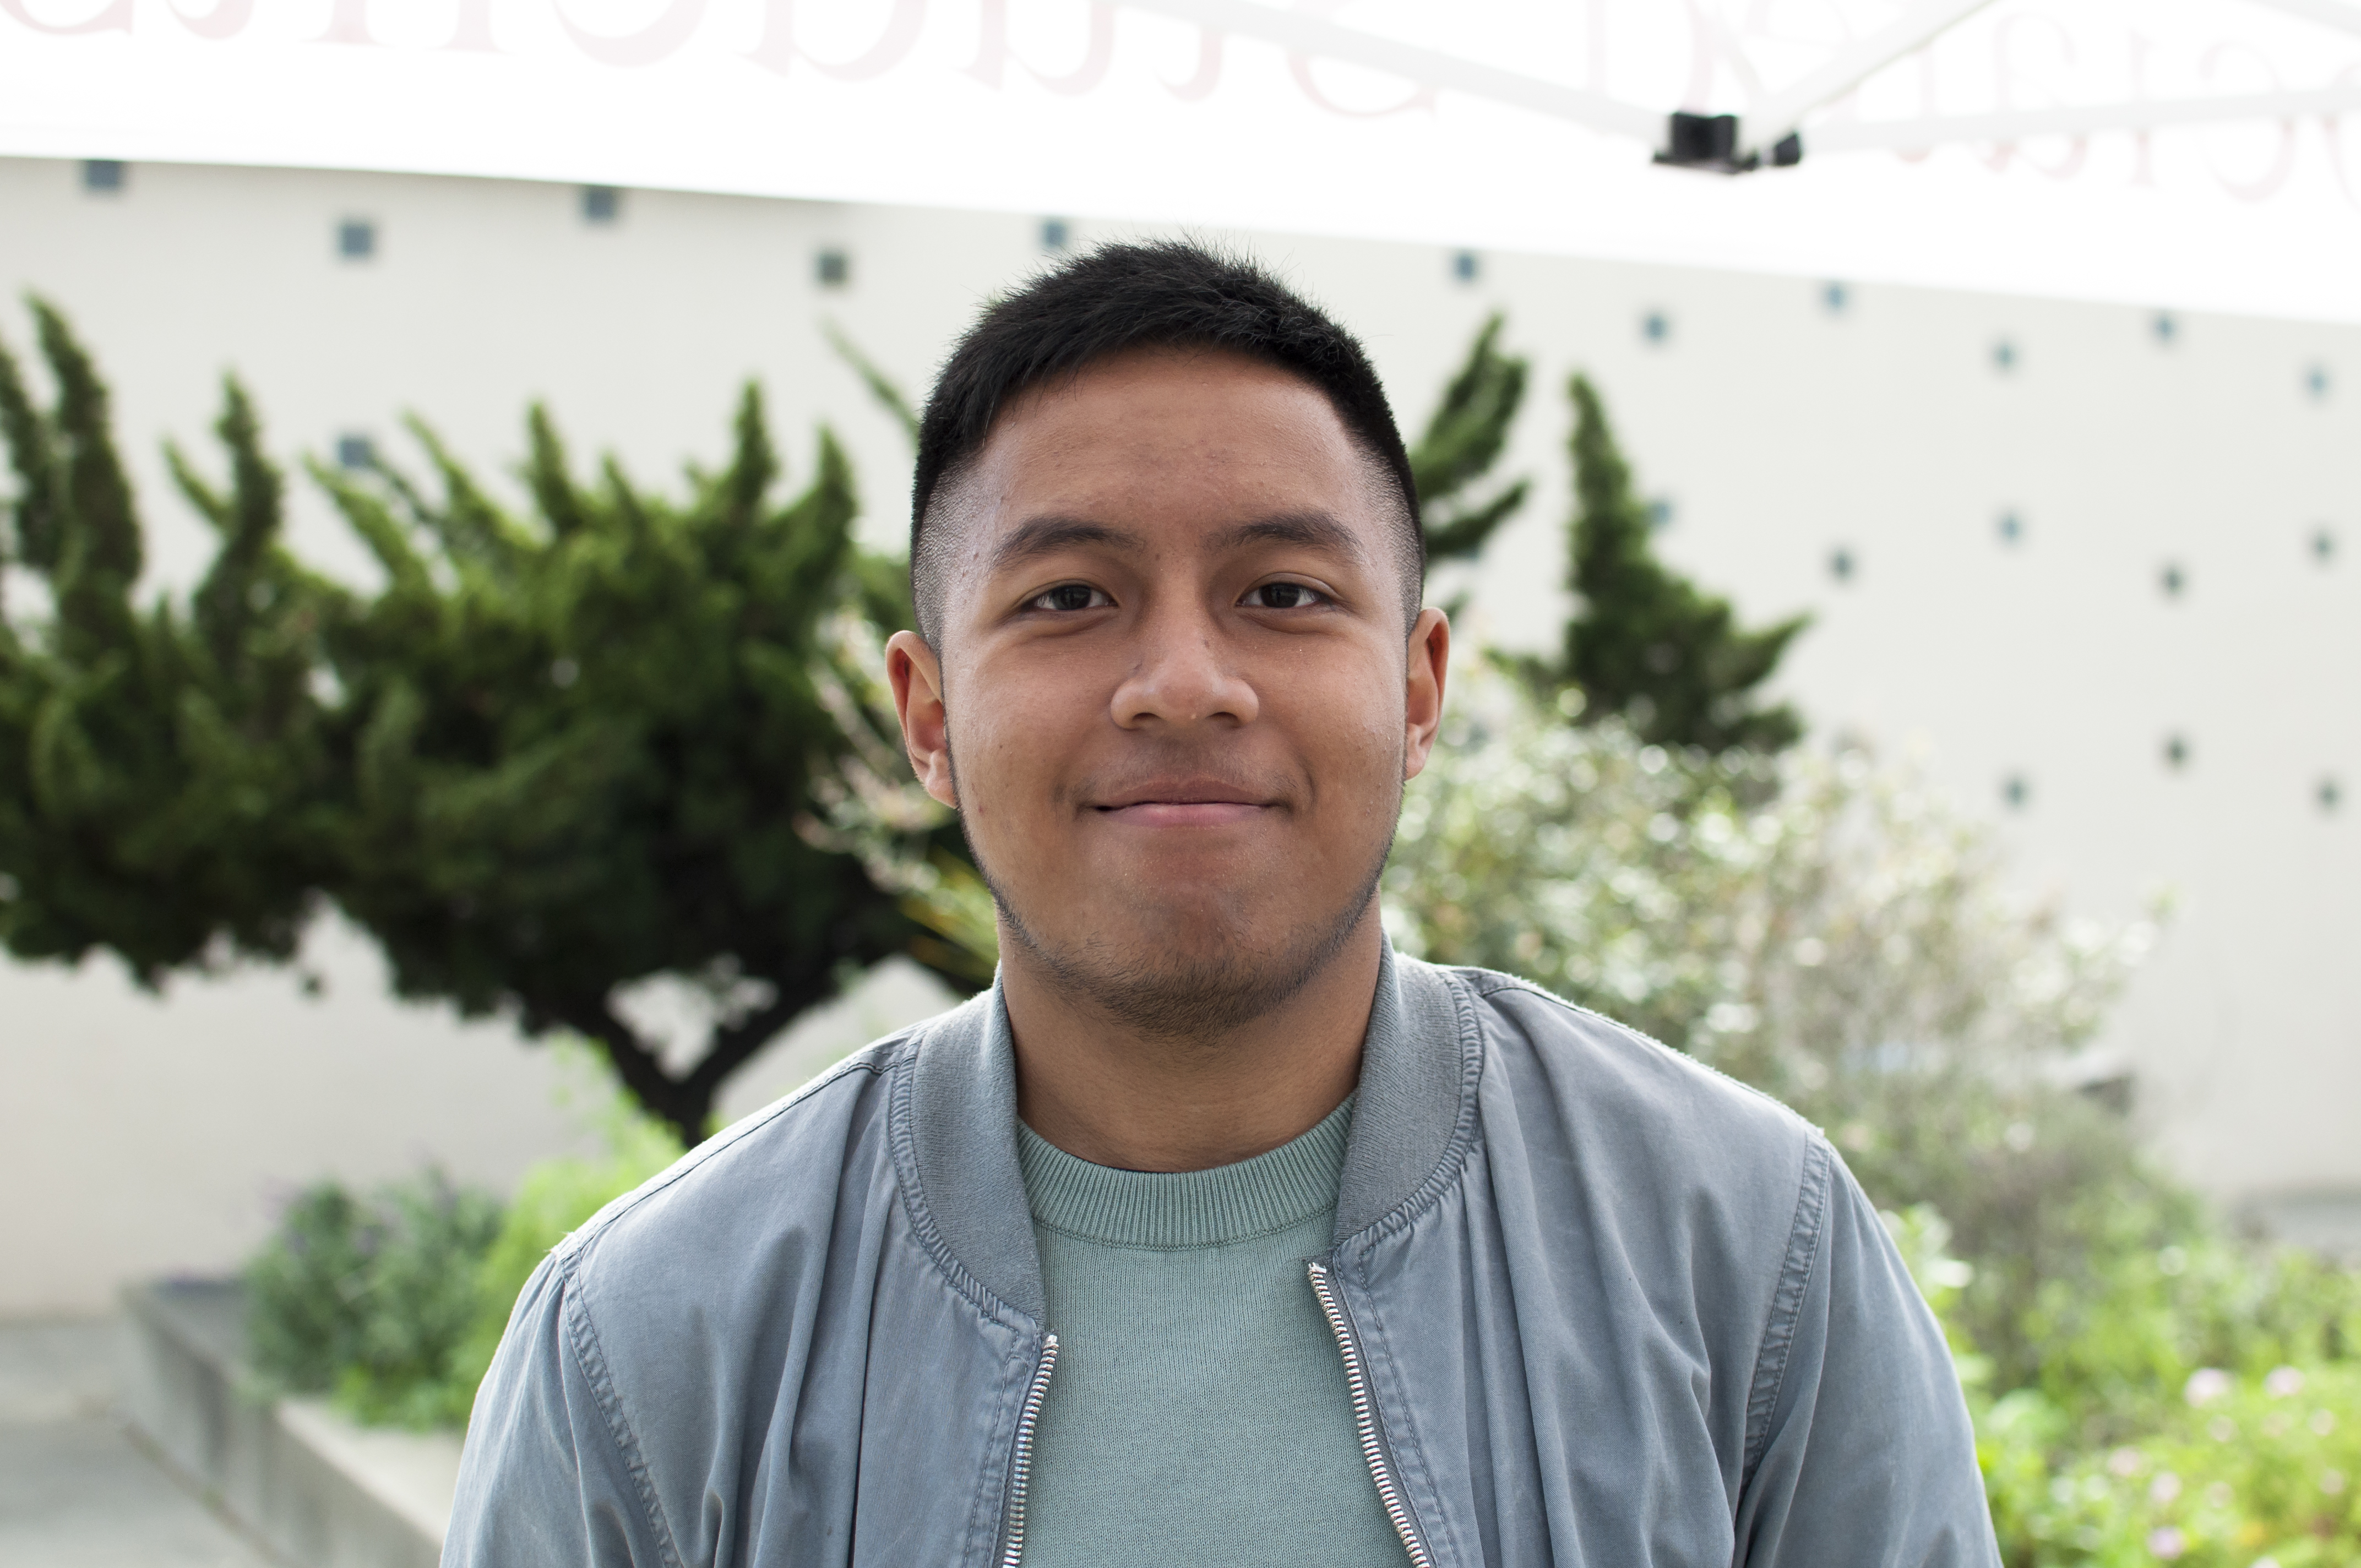 “It’s a cheaper alternative than going straight to university from high school. I chose this school specifically because I like the city, the environment and I have some family living here. There’s also a lot of students that come from my country, Indonesia.” -Raafi Laksana Business Administration, Sophomore 